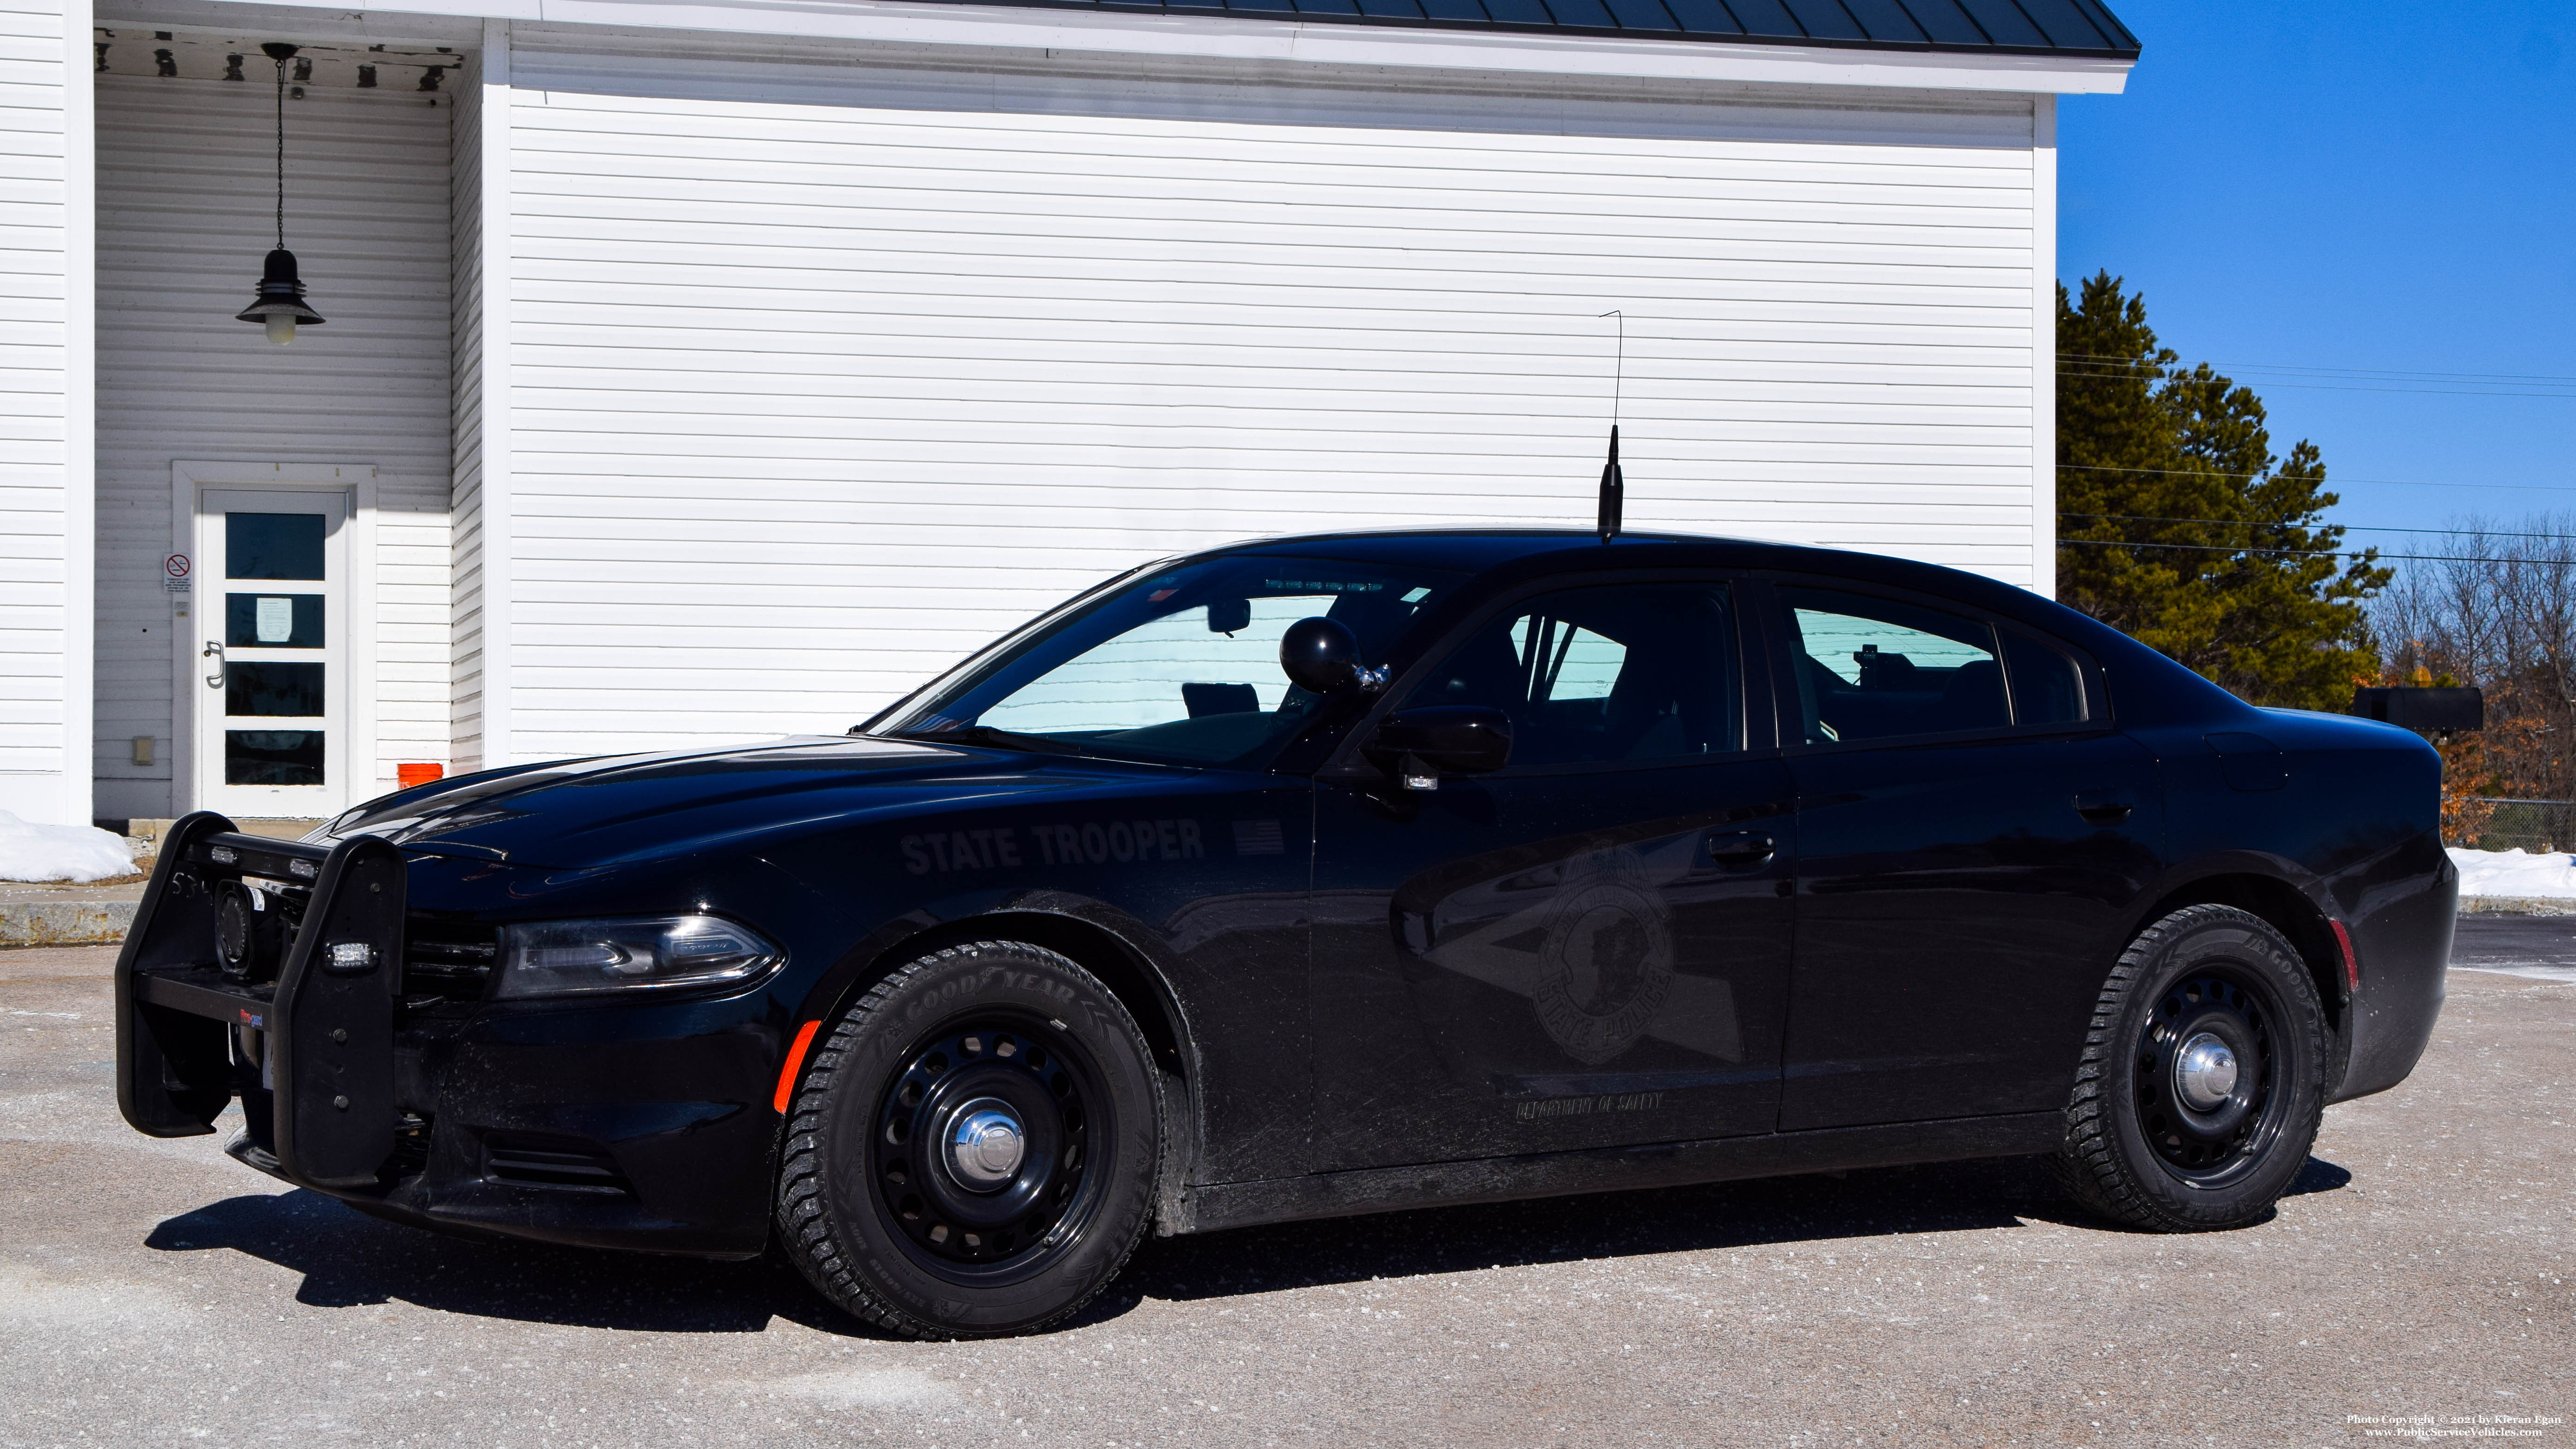 A photo  of New Hampshire State Police
            Cruiser 232, a 2018 Dodge Charger             taken by Kieran Egan